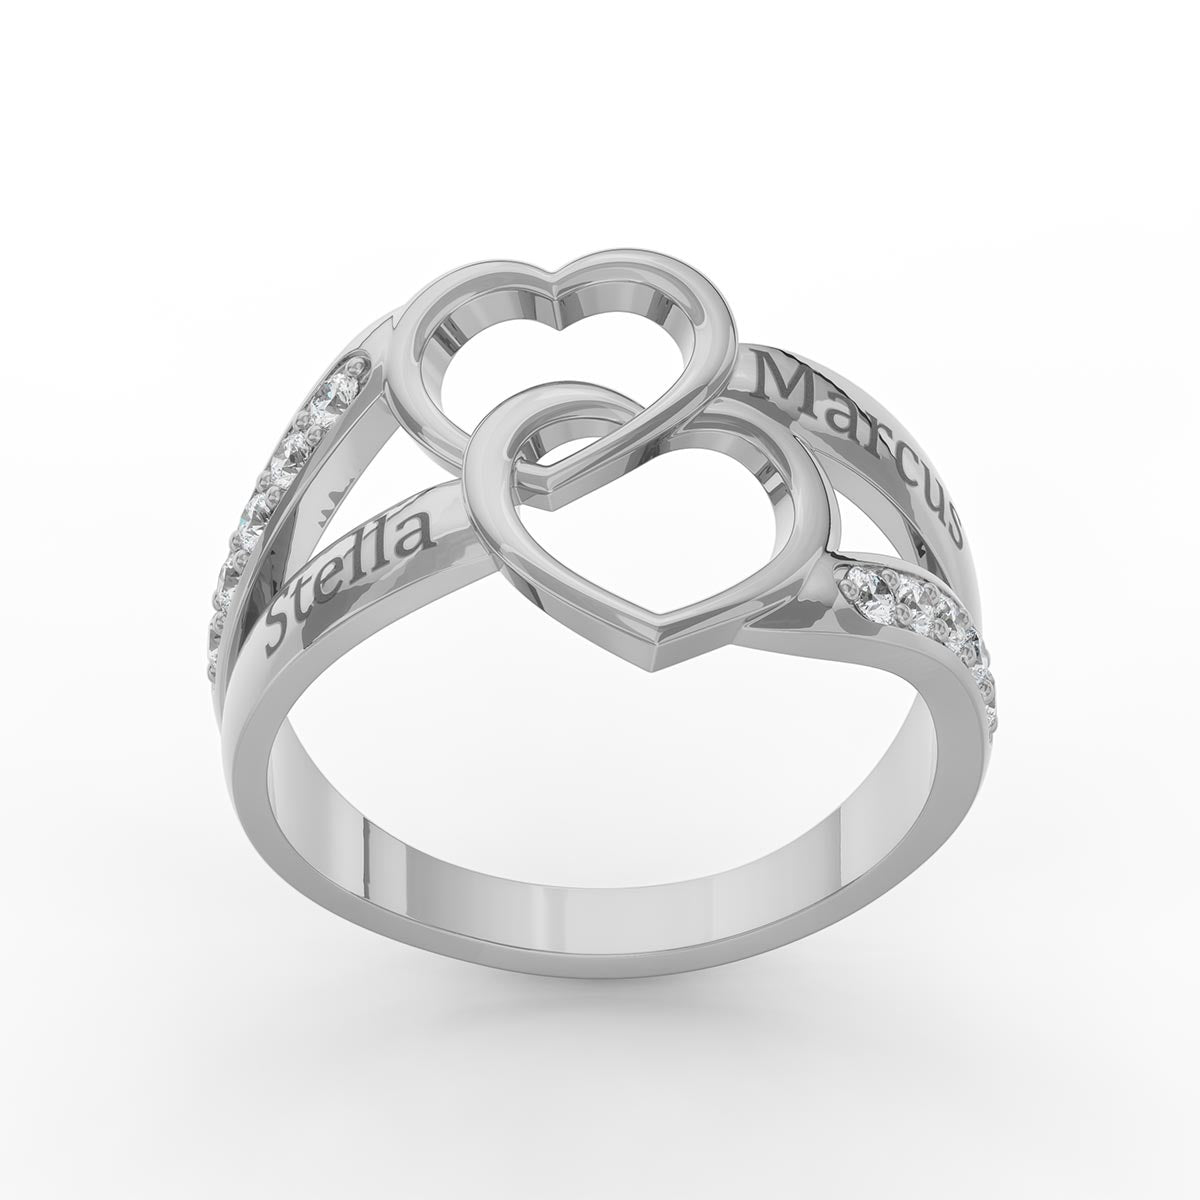 Personalized Interlocking Hearts Ring with Stones